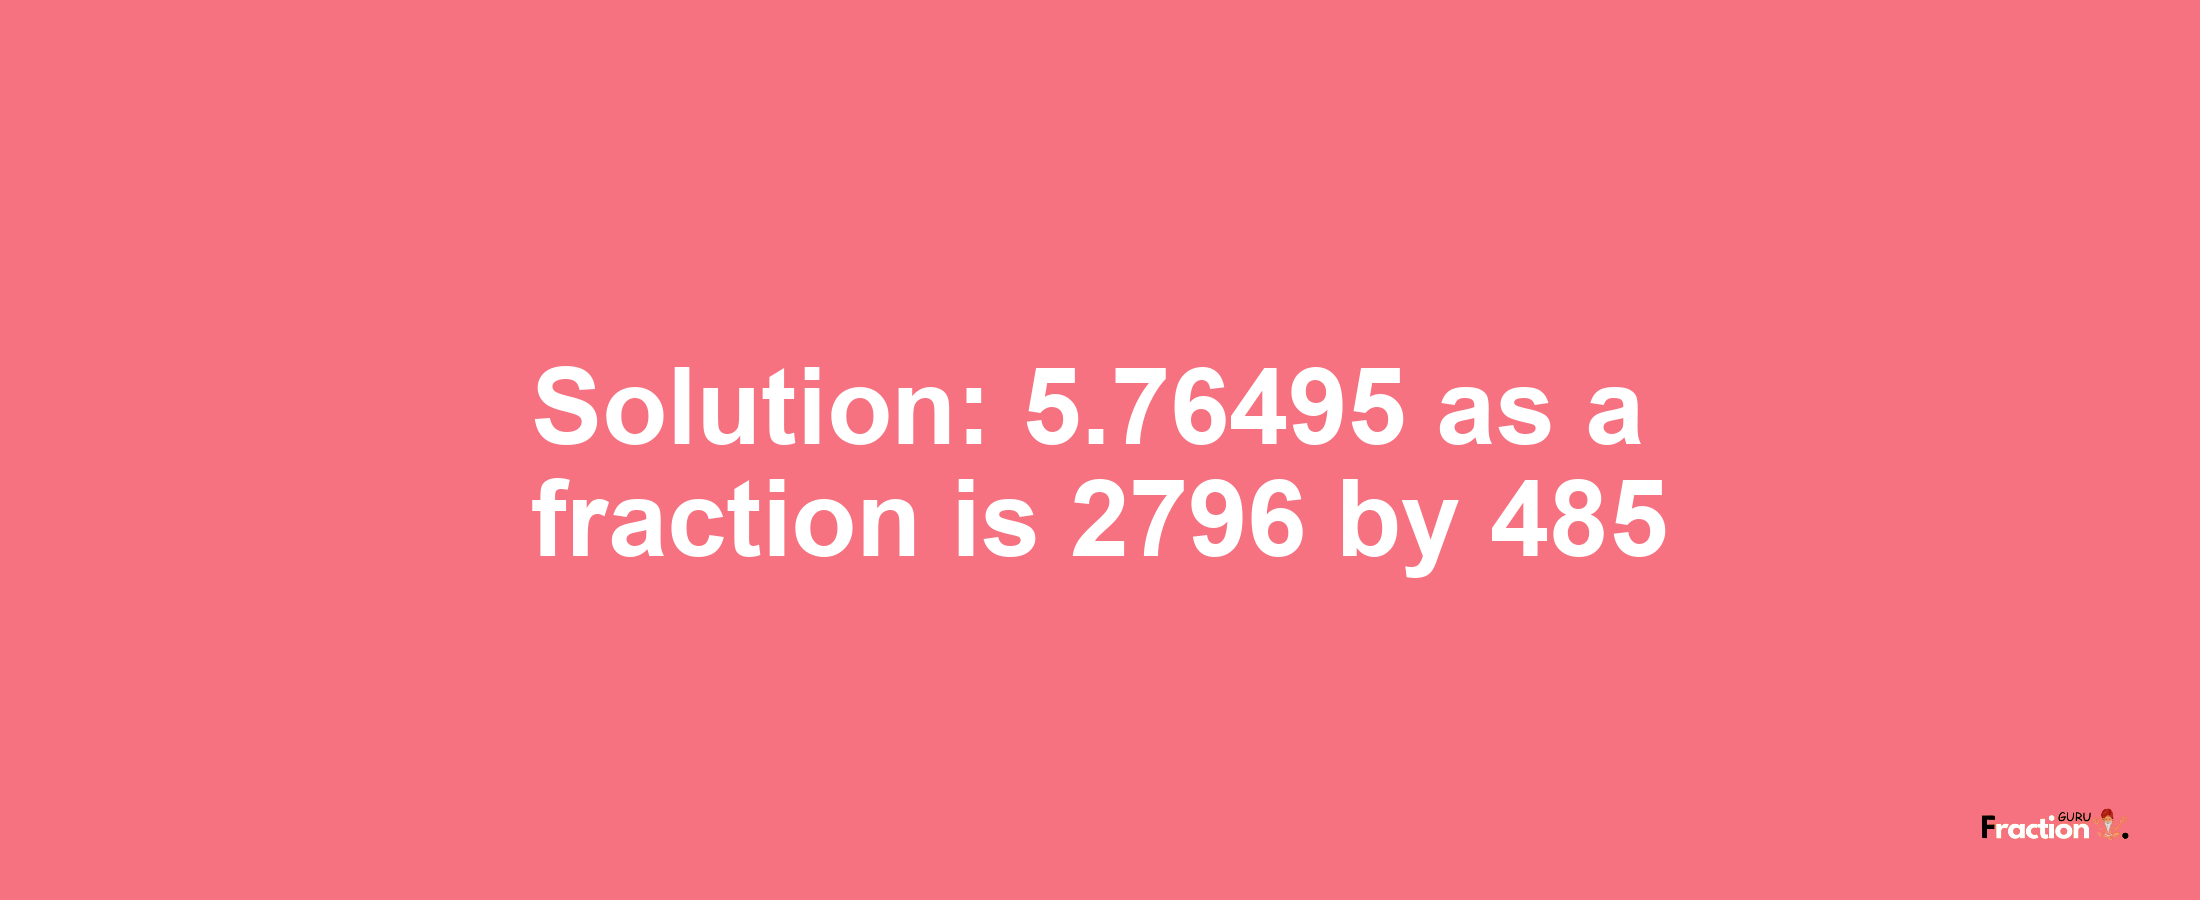 Solution:5.76495 as a fraction is 2796/485